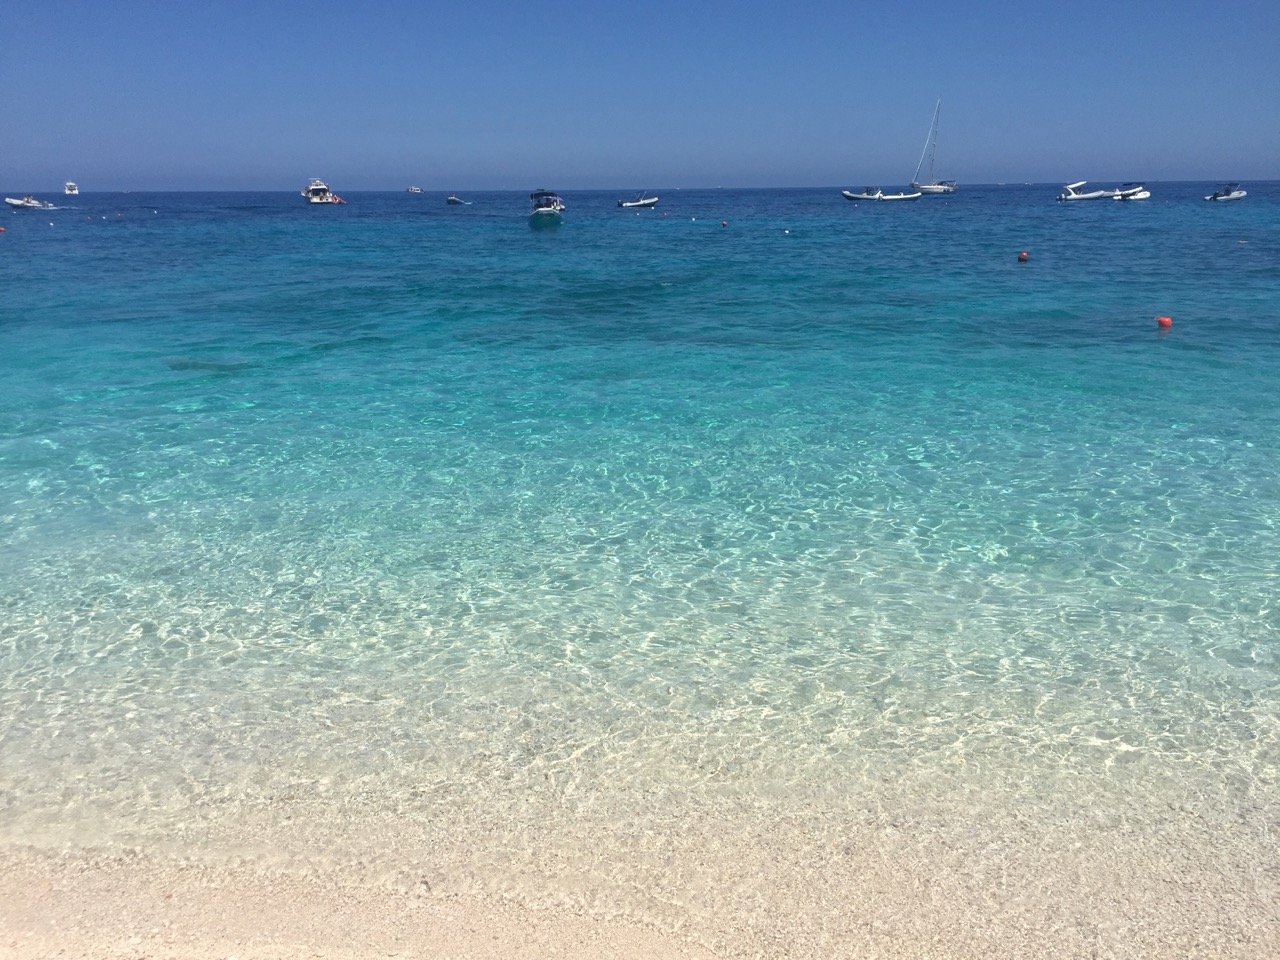 The translucent waters of Cala Mariolu